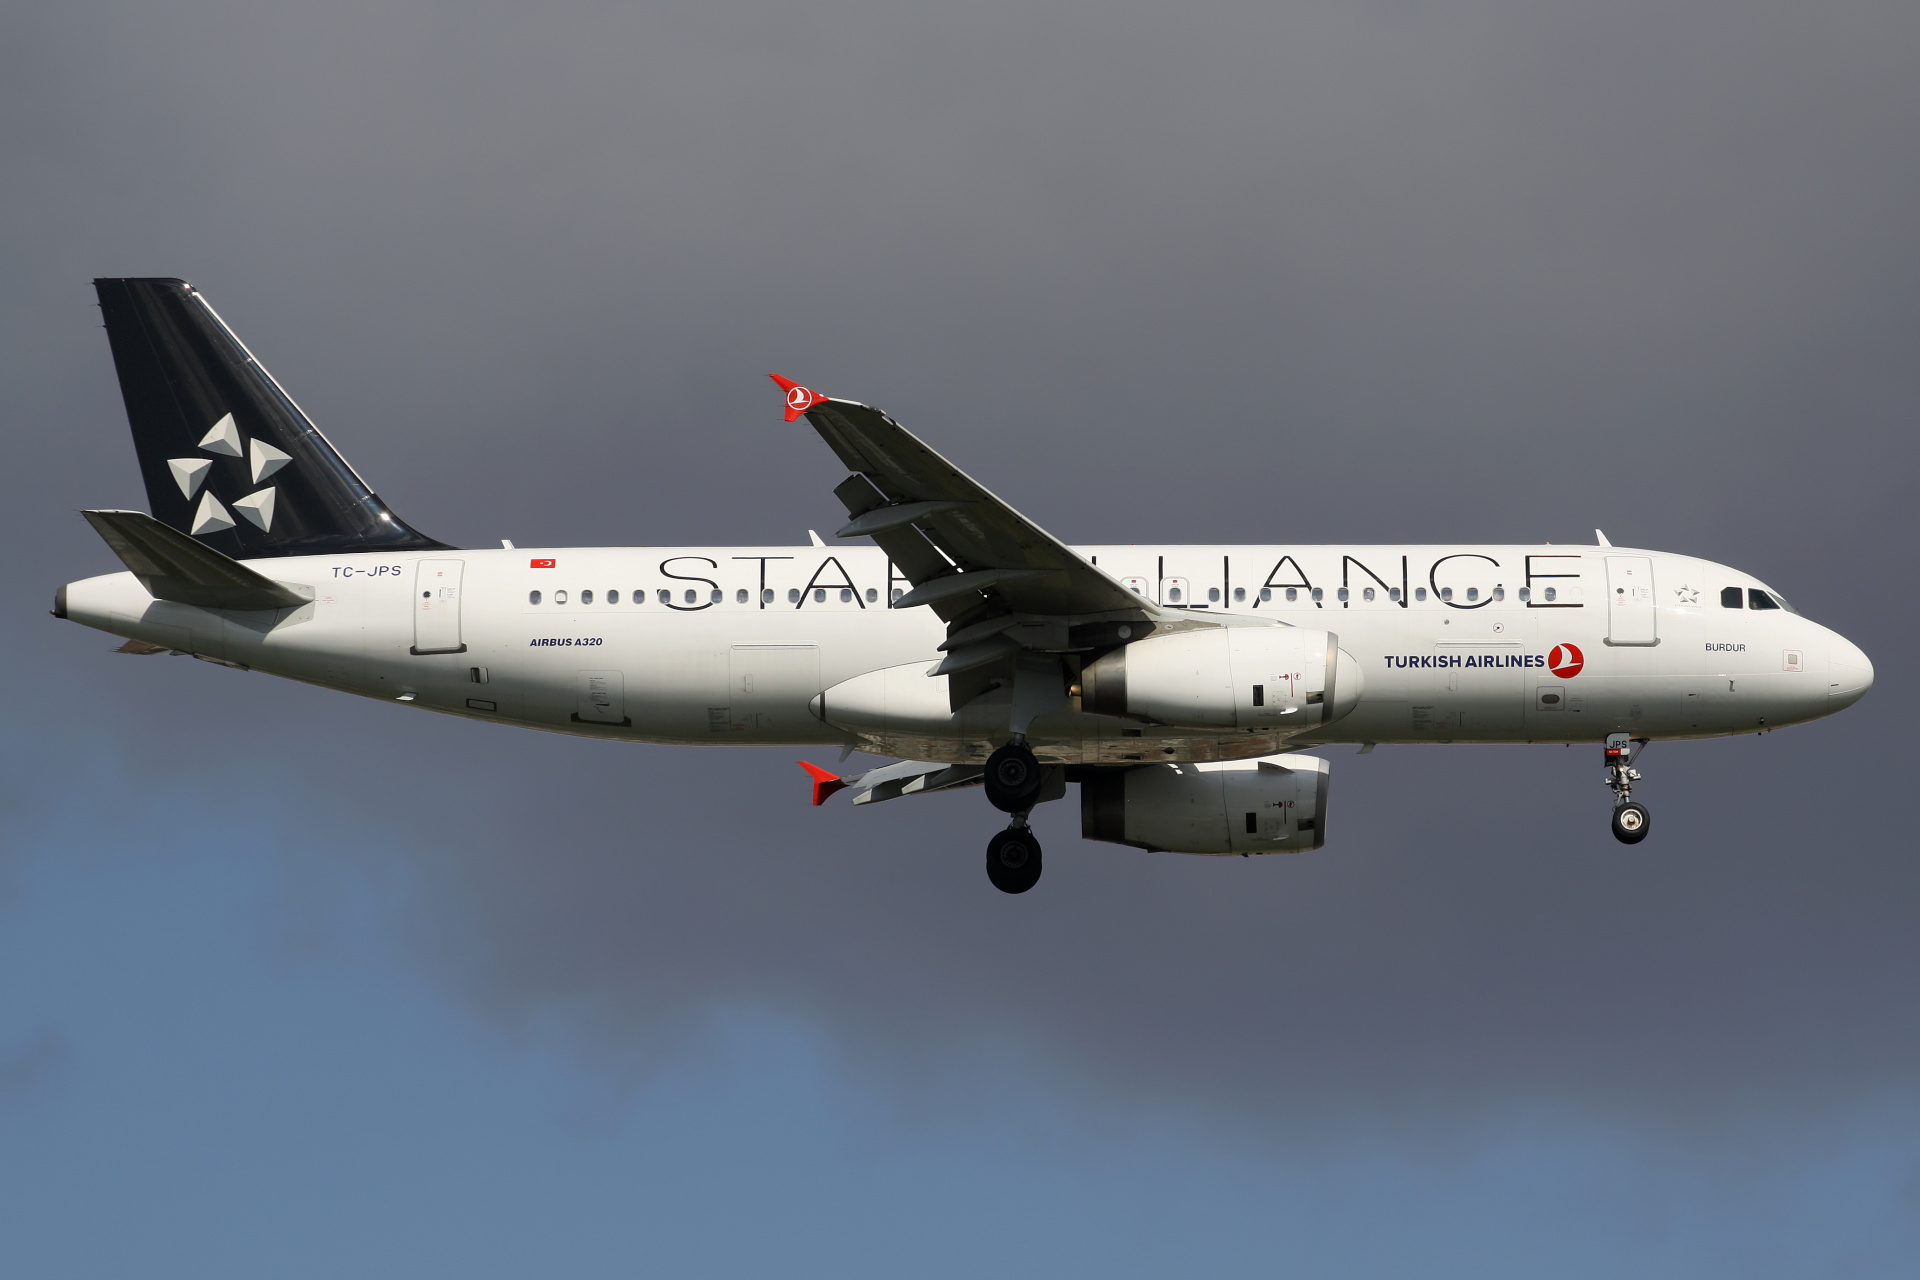 TC-JPS, THY Turkish Airlines (Star Alliance livery) (Aircraft » Istanbul Atatürk Airport » Airbus A320-200)